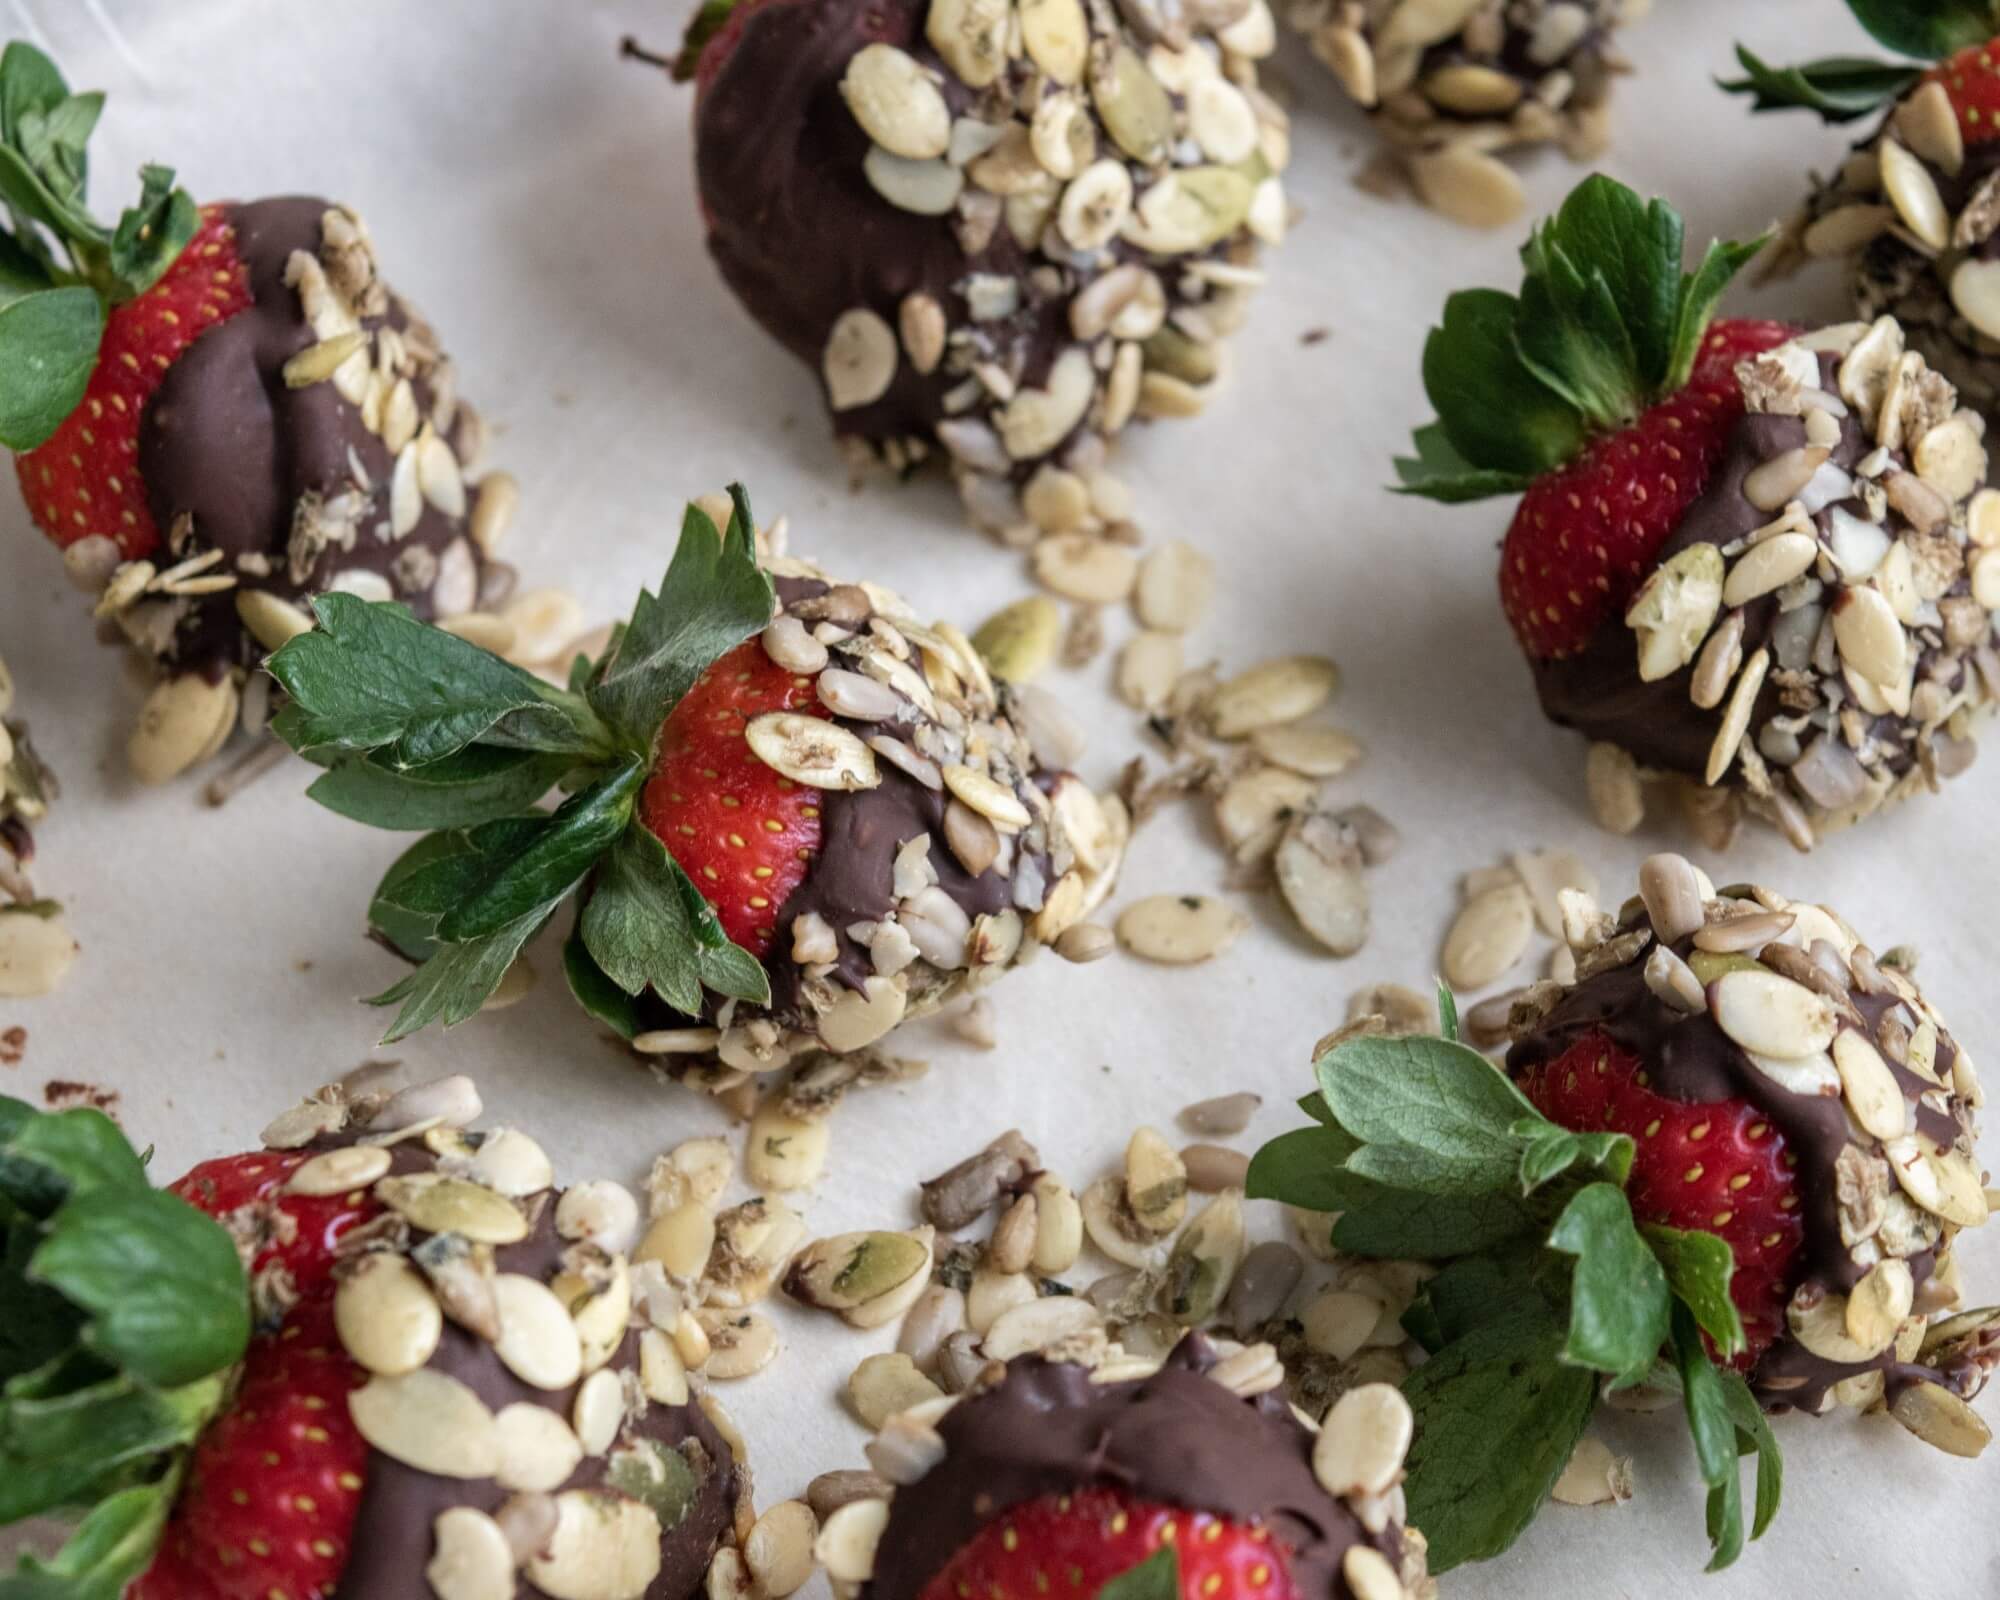 Chocolate & Seed Covered Strawberries